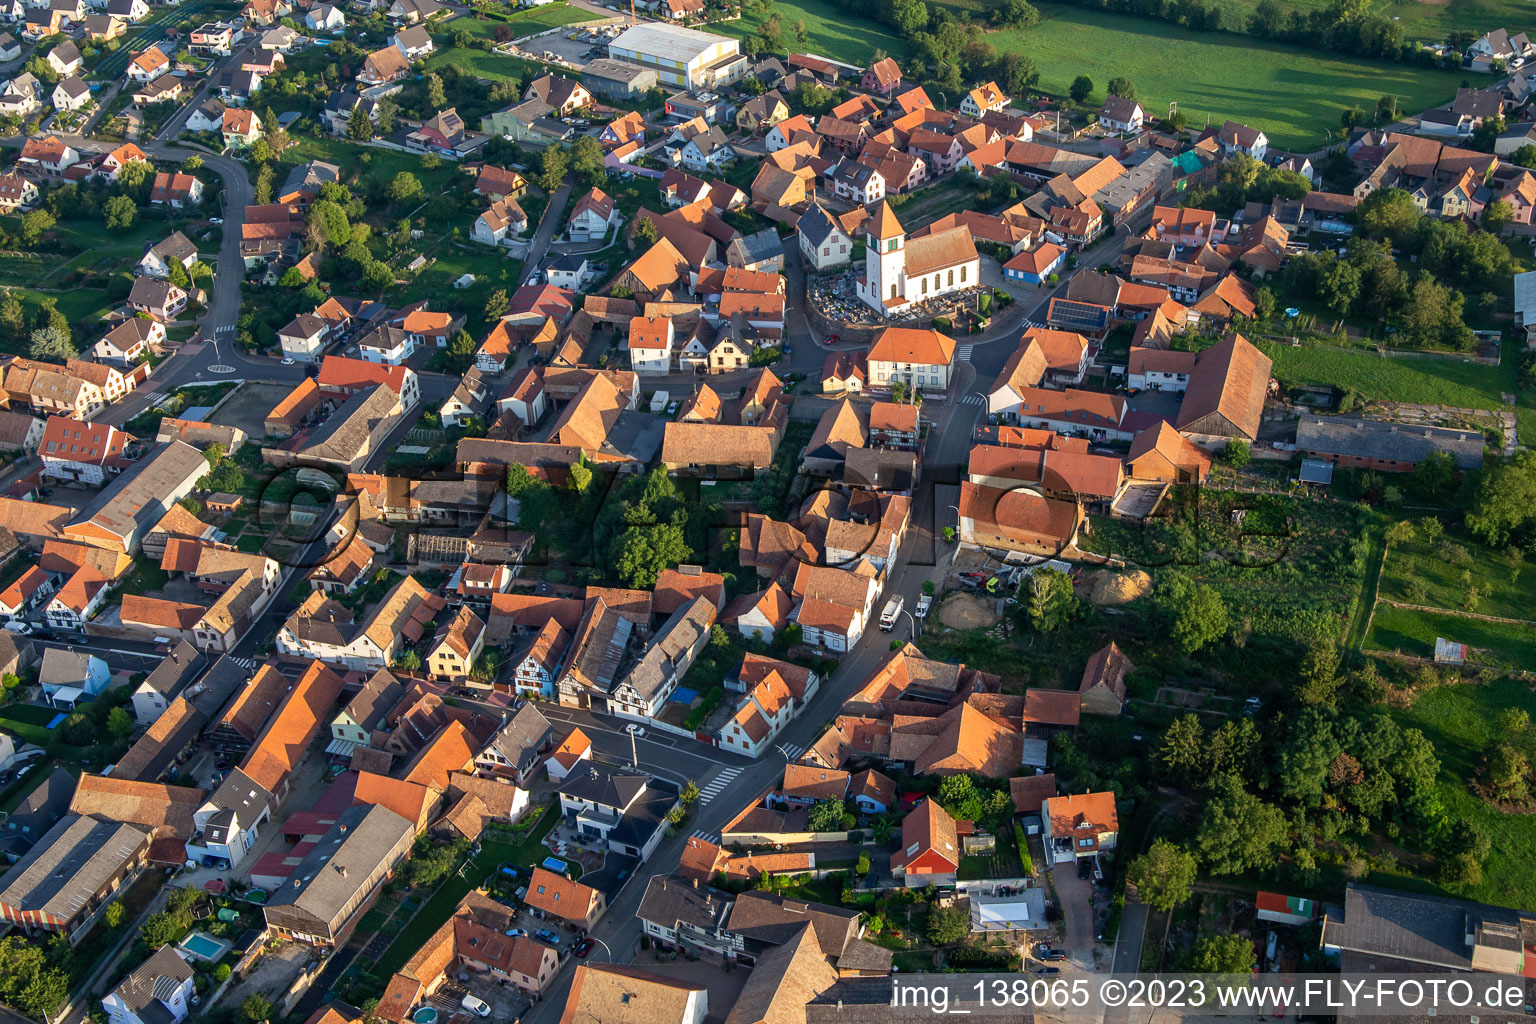 Aerial view of Eglise Saint Hilaire in Minversheim in the state Bas-Rhin, France